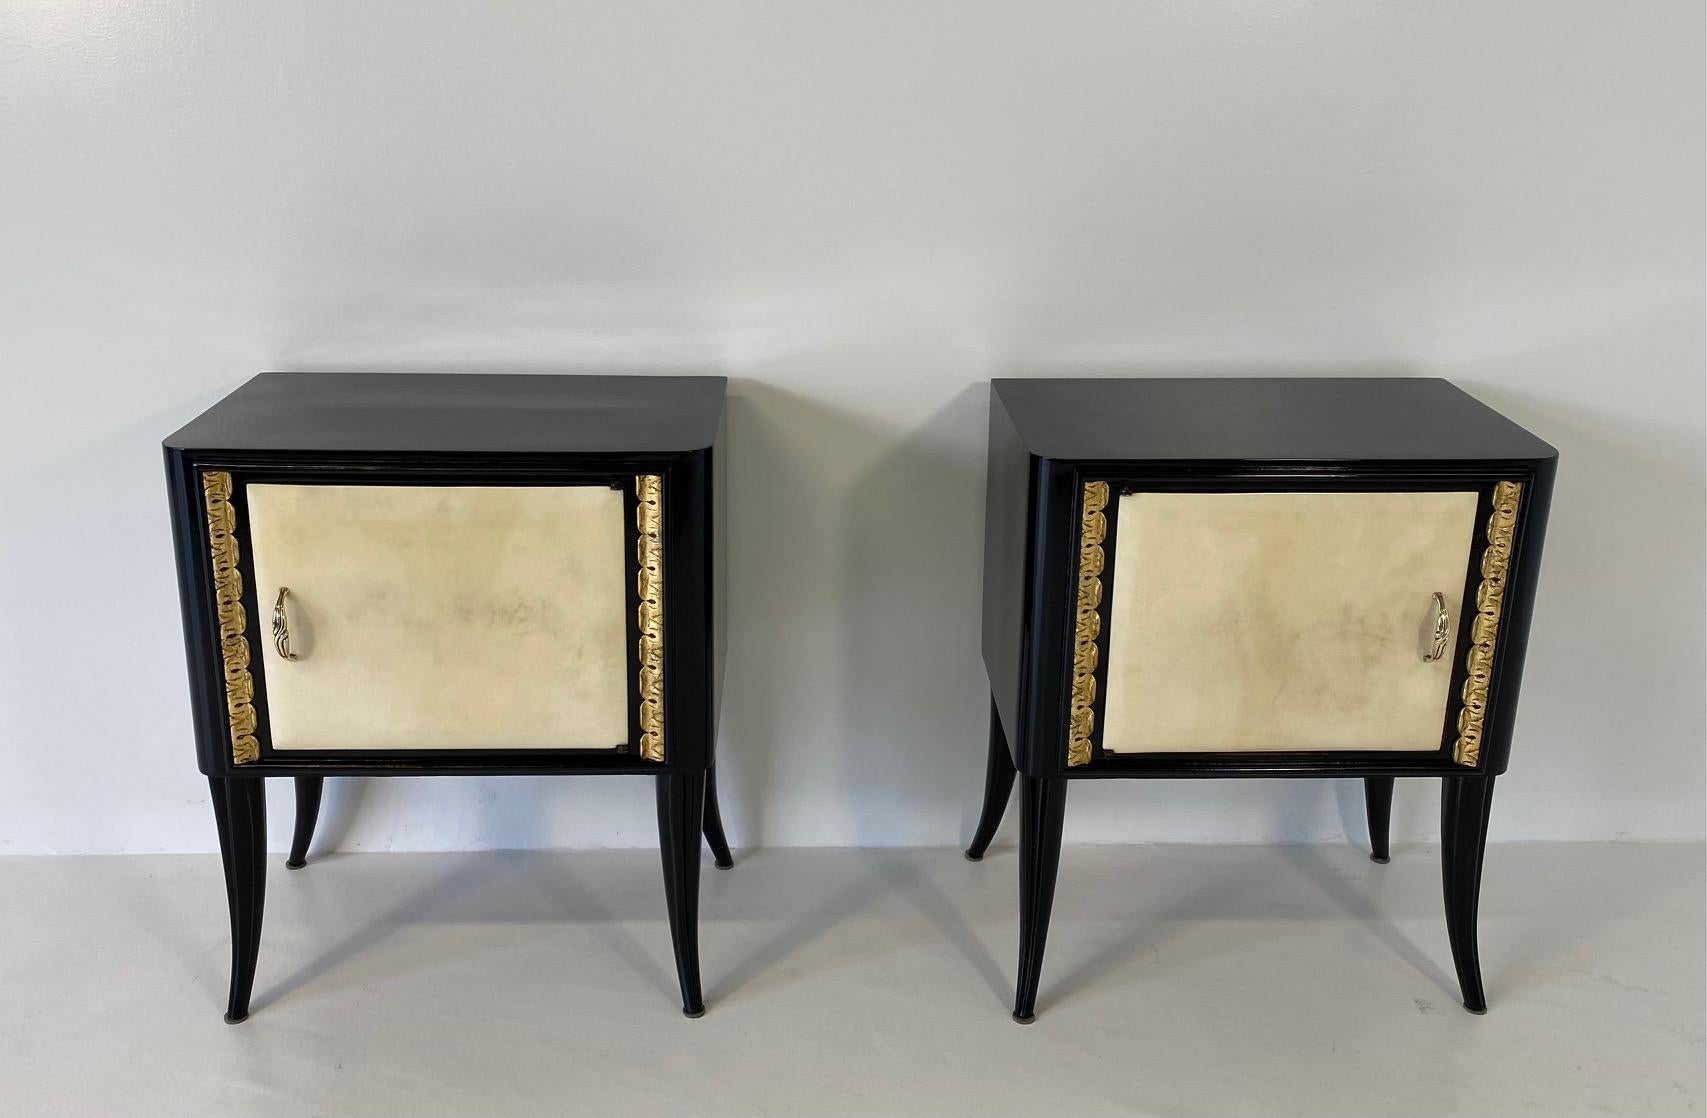 This Art Deco nightstands were produced in Italy in the 1940s.

They features one parchment covered door each, a black lacquered structure and gold leaf decorations. 

The handless are in brass.

Matching dresser available. 

Completely restored.